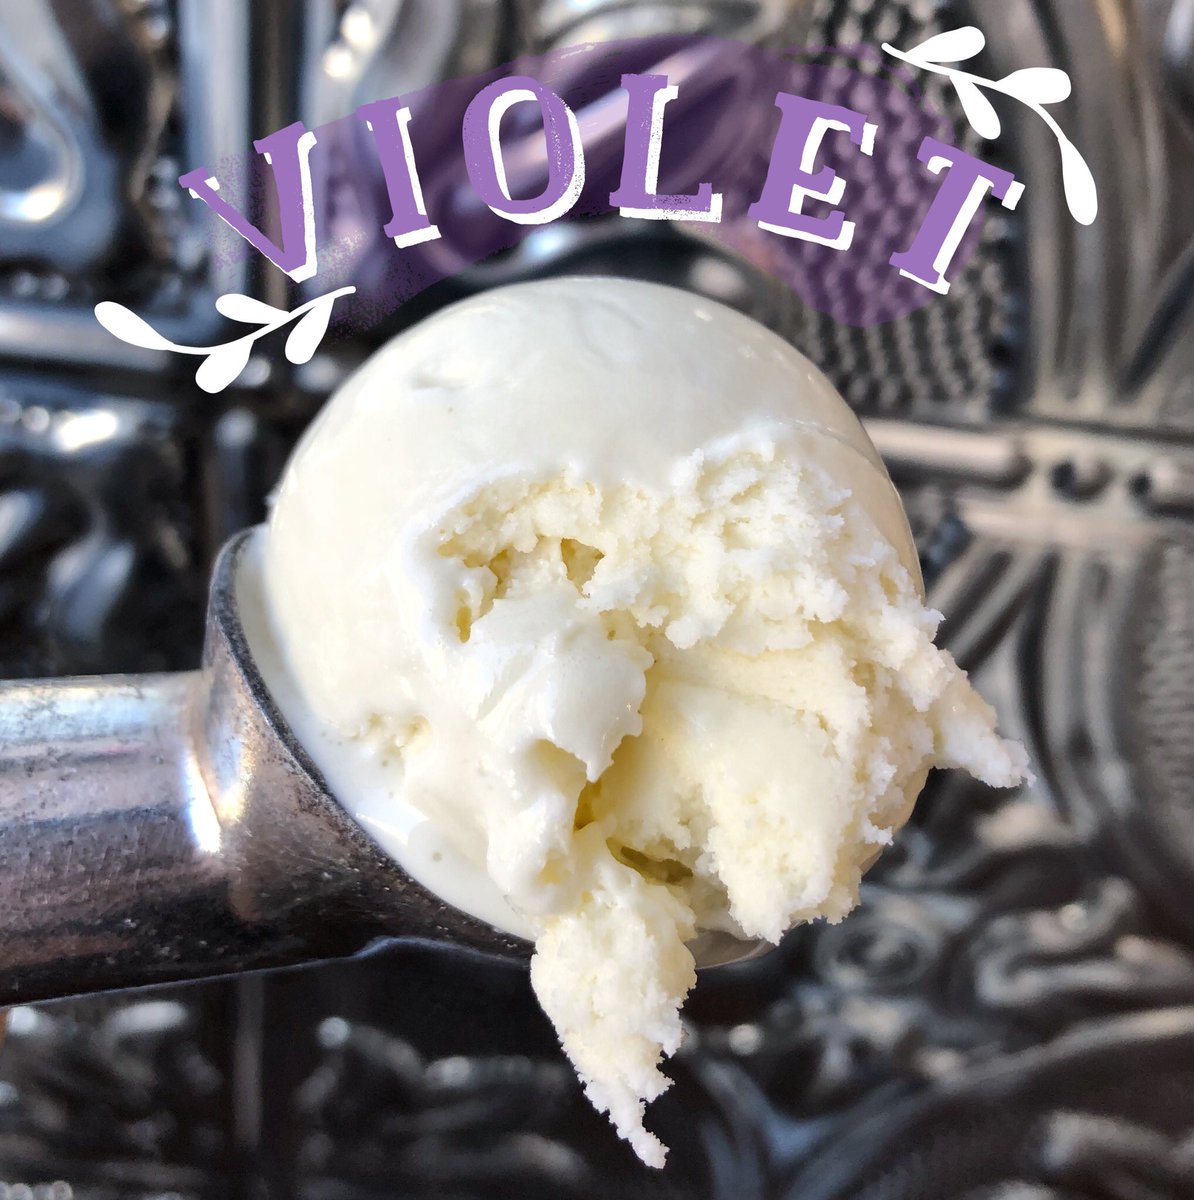 Get ready to welcome Spring with a new floral flavor!  Violet is here now.

#Rochester #RochesterNY #upstateny #roc #585 #ThisIsRoc #ExploreRochester #IHeartRoc #VisitRoc #RocEats #RochesterFoodies